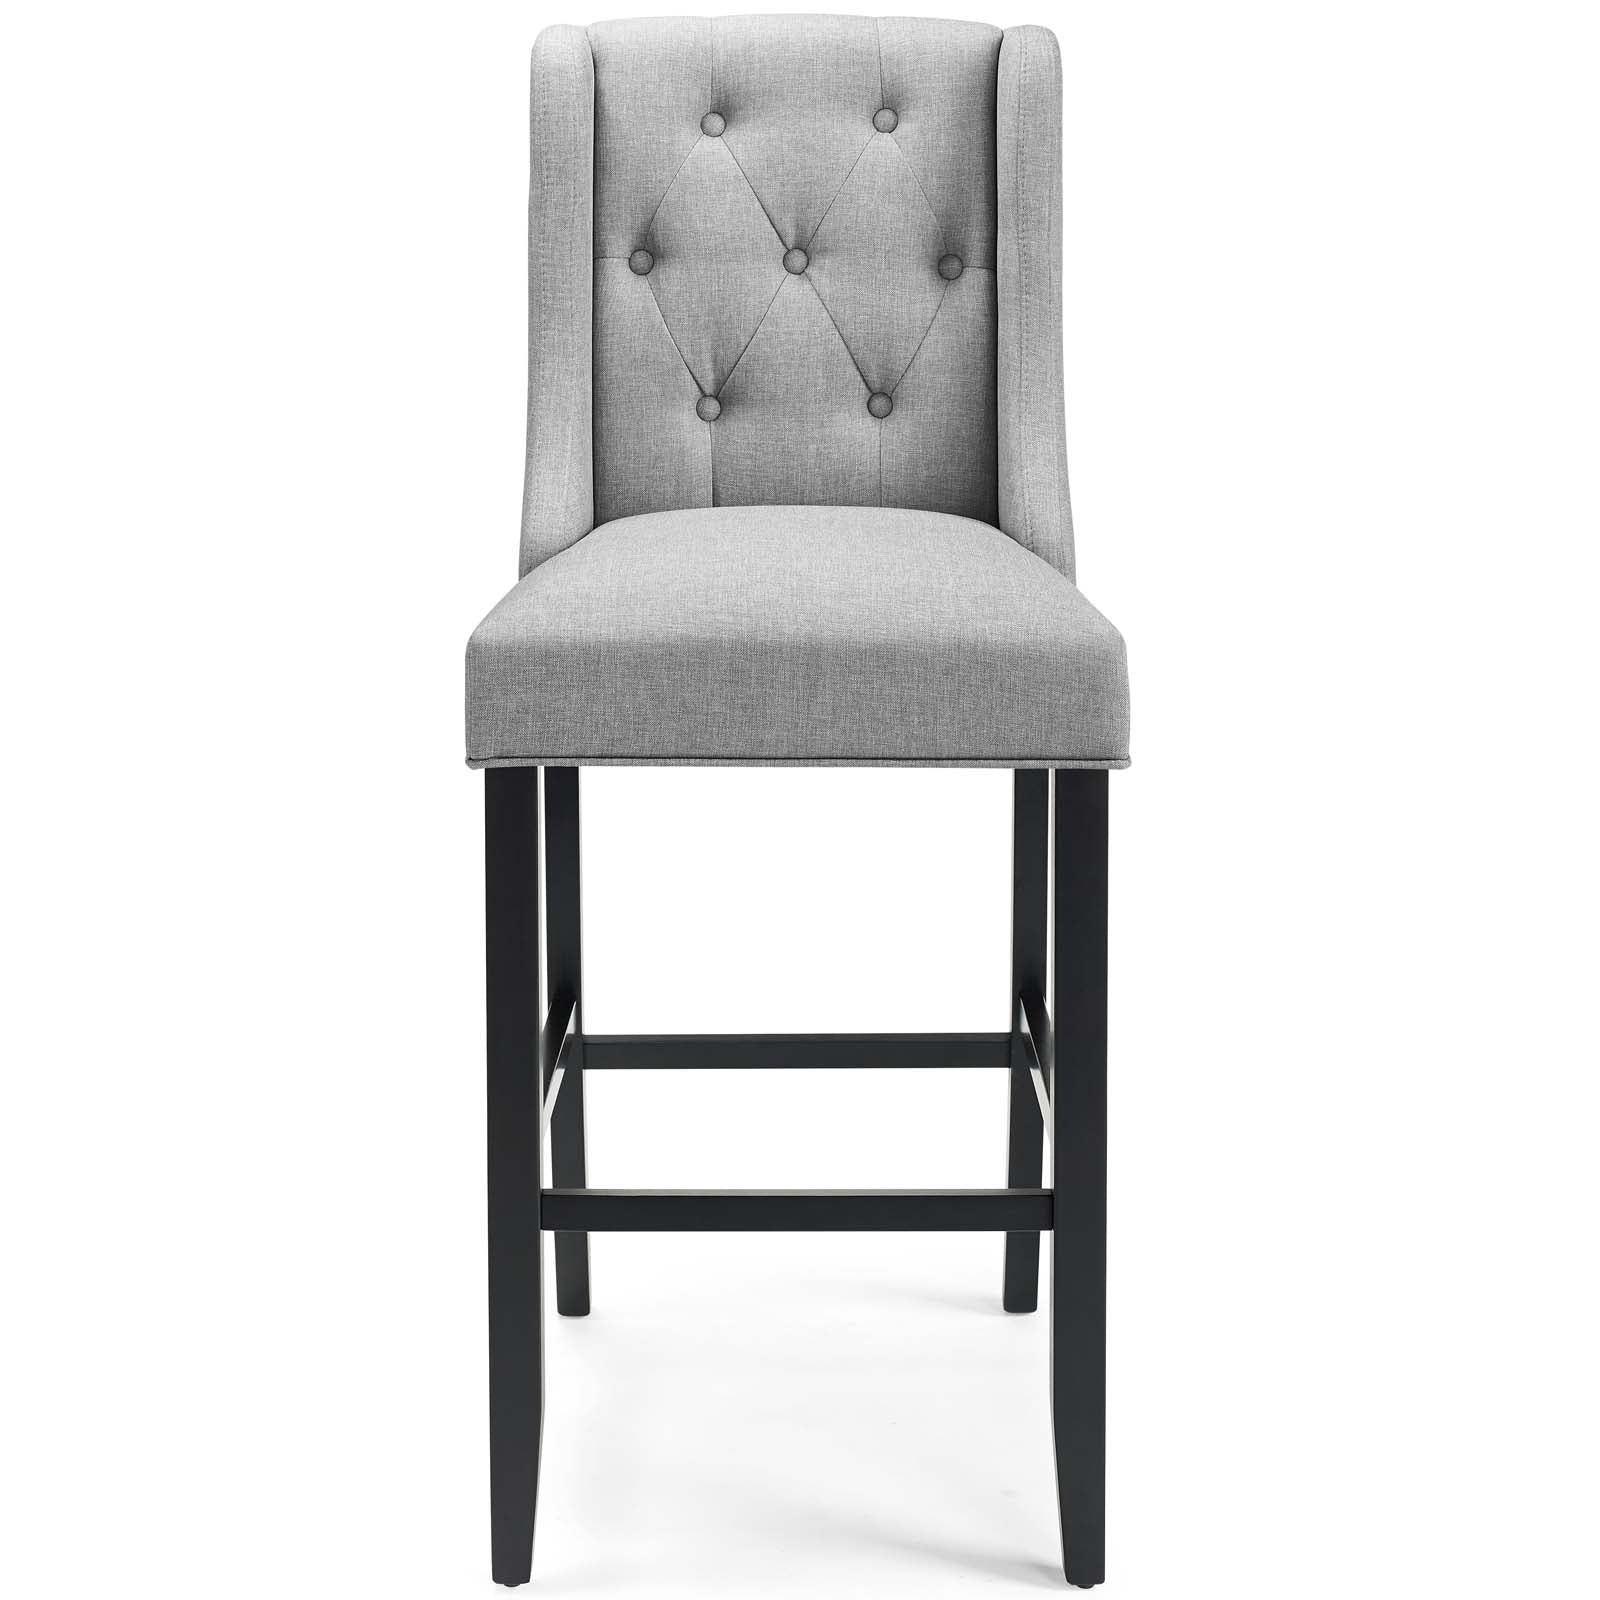 Modway Barstools - Baronet Tufted Button Upholstered Fabric Bar Stool Light Gray